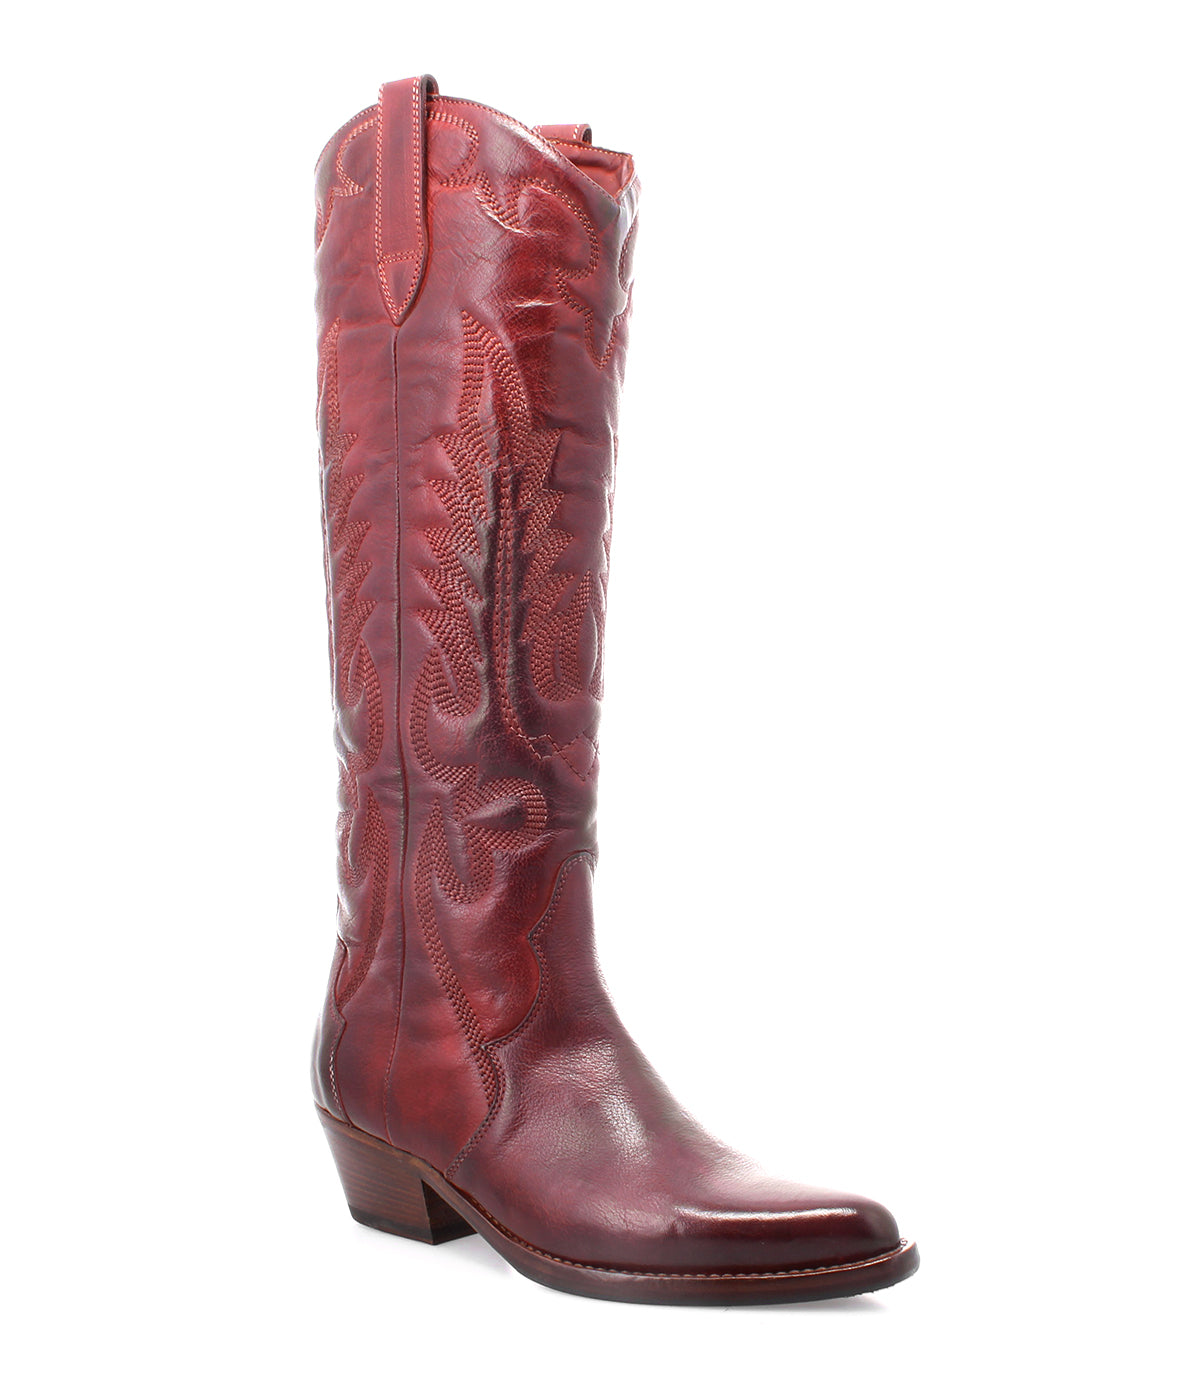 A women's Finito red leather cowboy boot with a distressed finish on a white background, by Bed Stu.